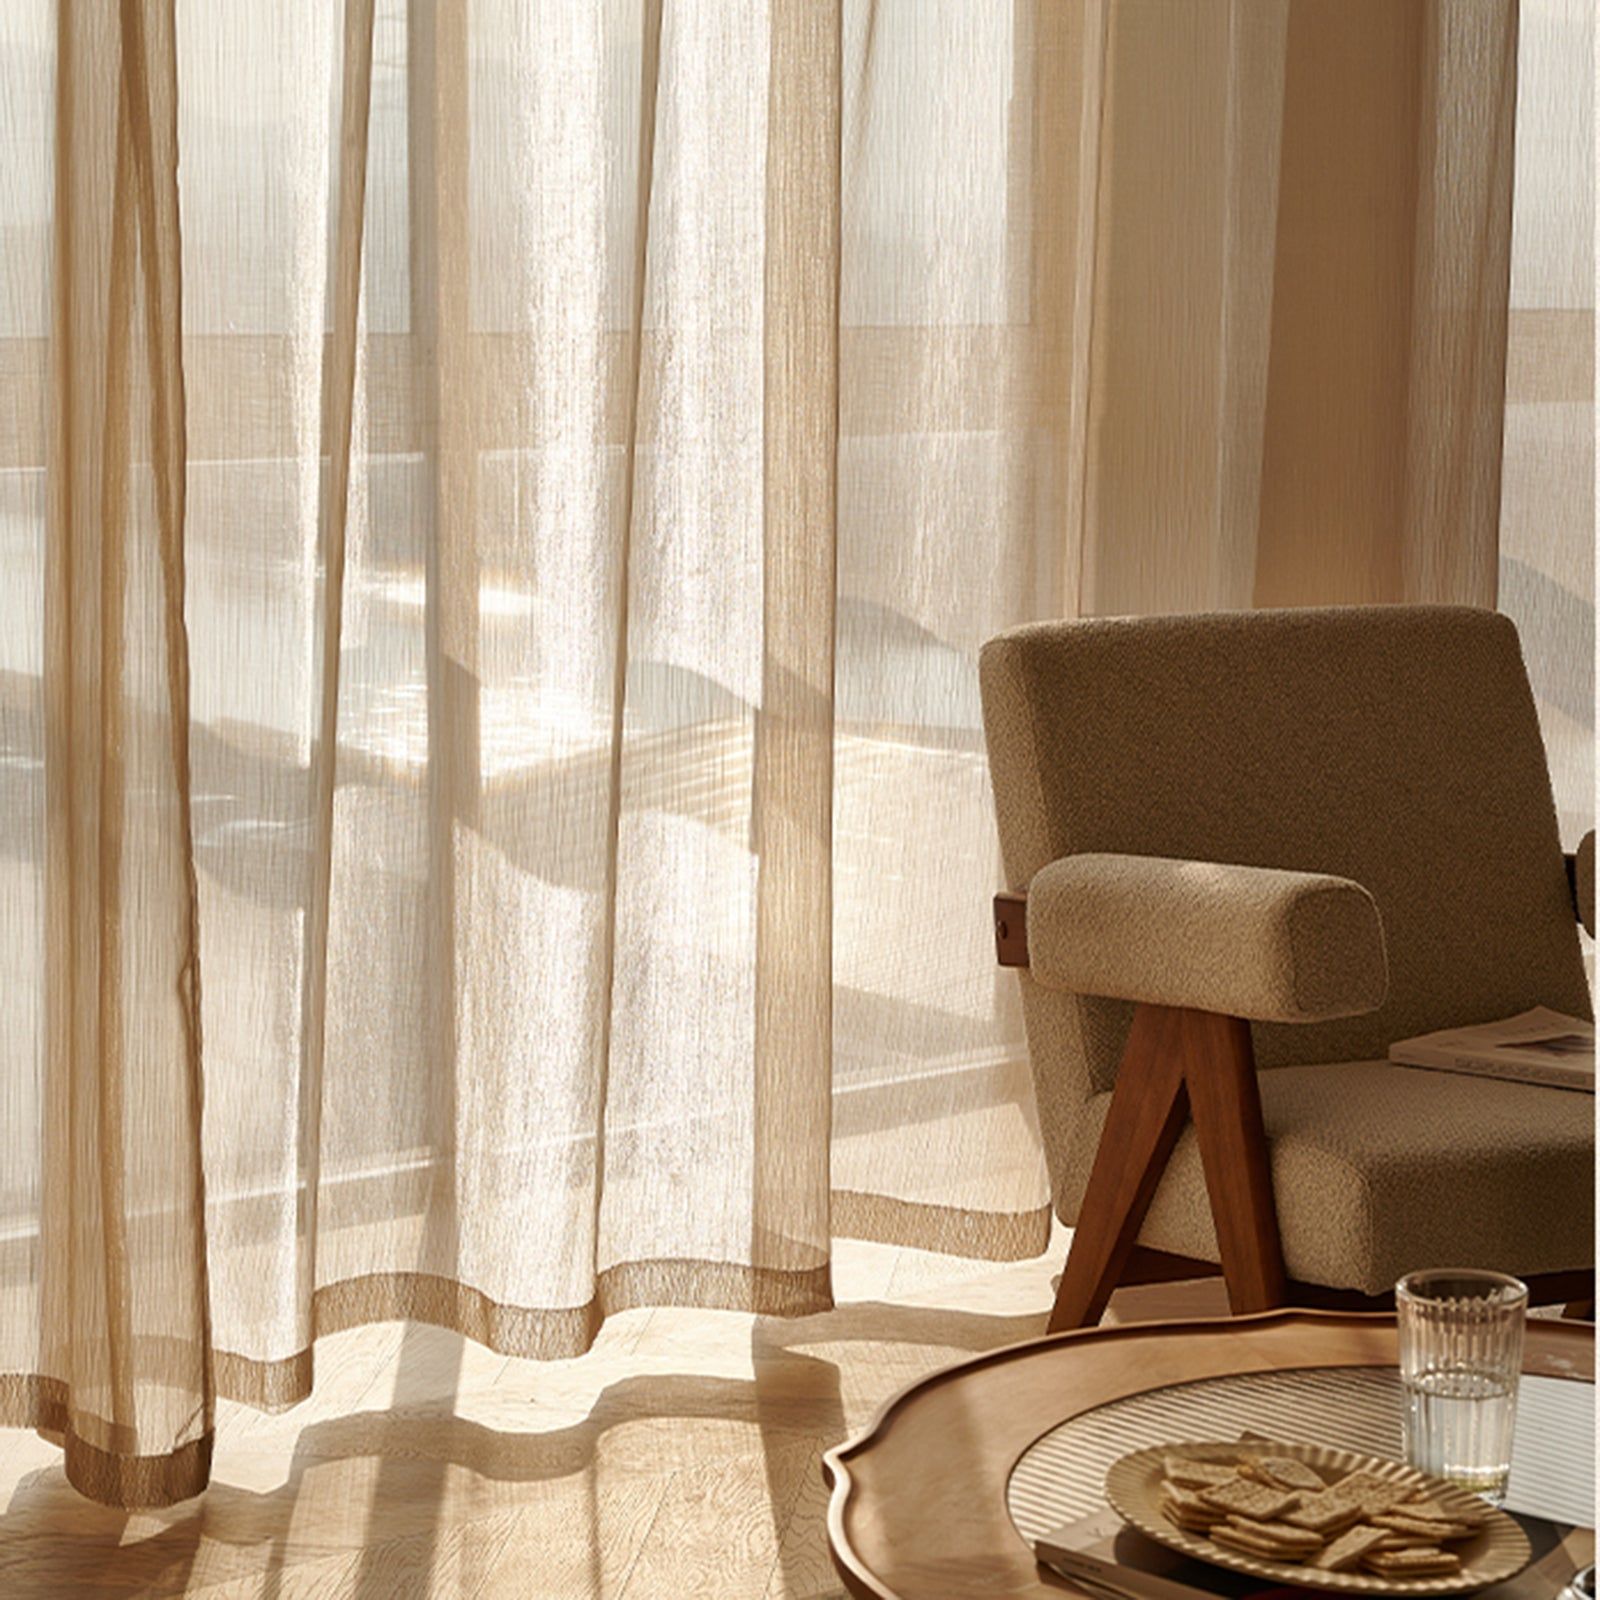 Enhance Your Home Decor with Beautiful Designer Curtains